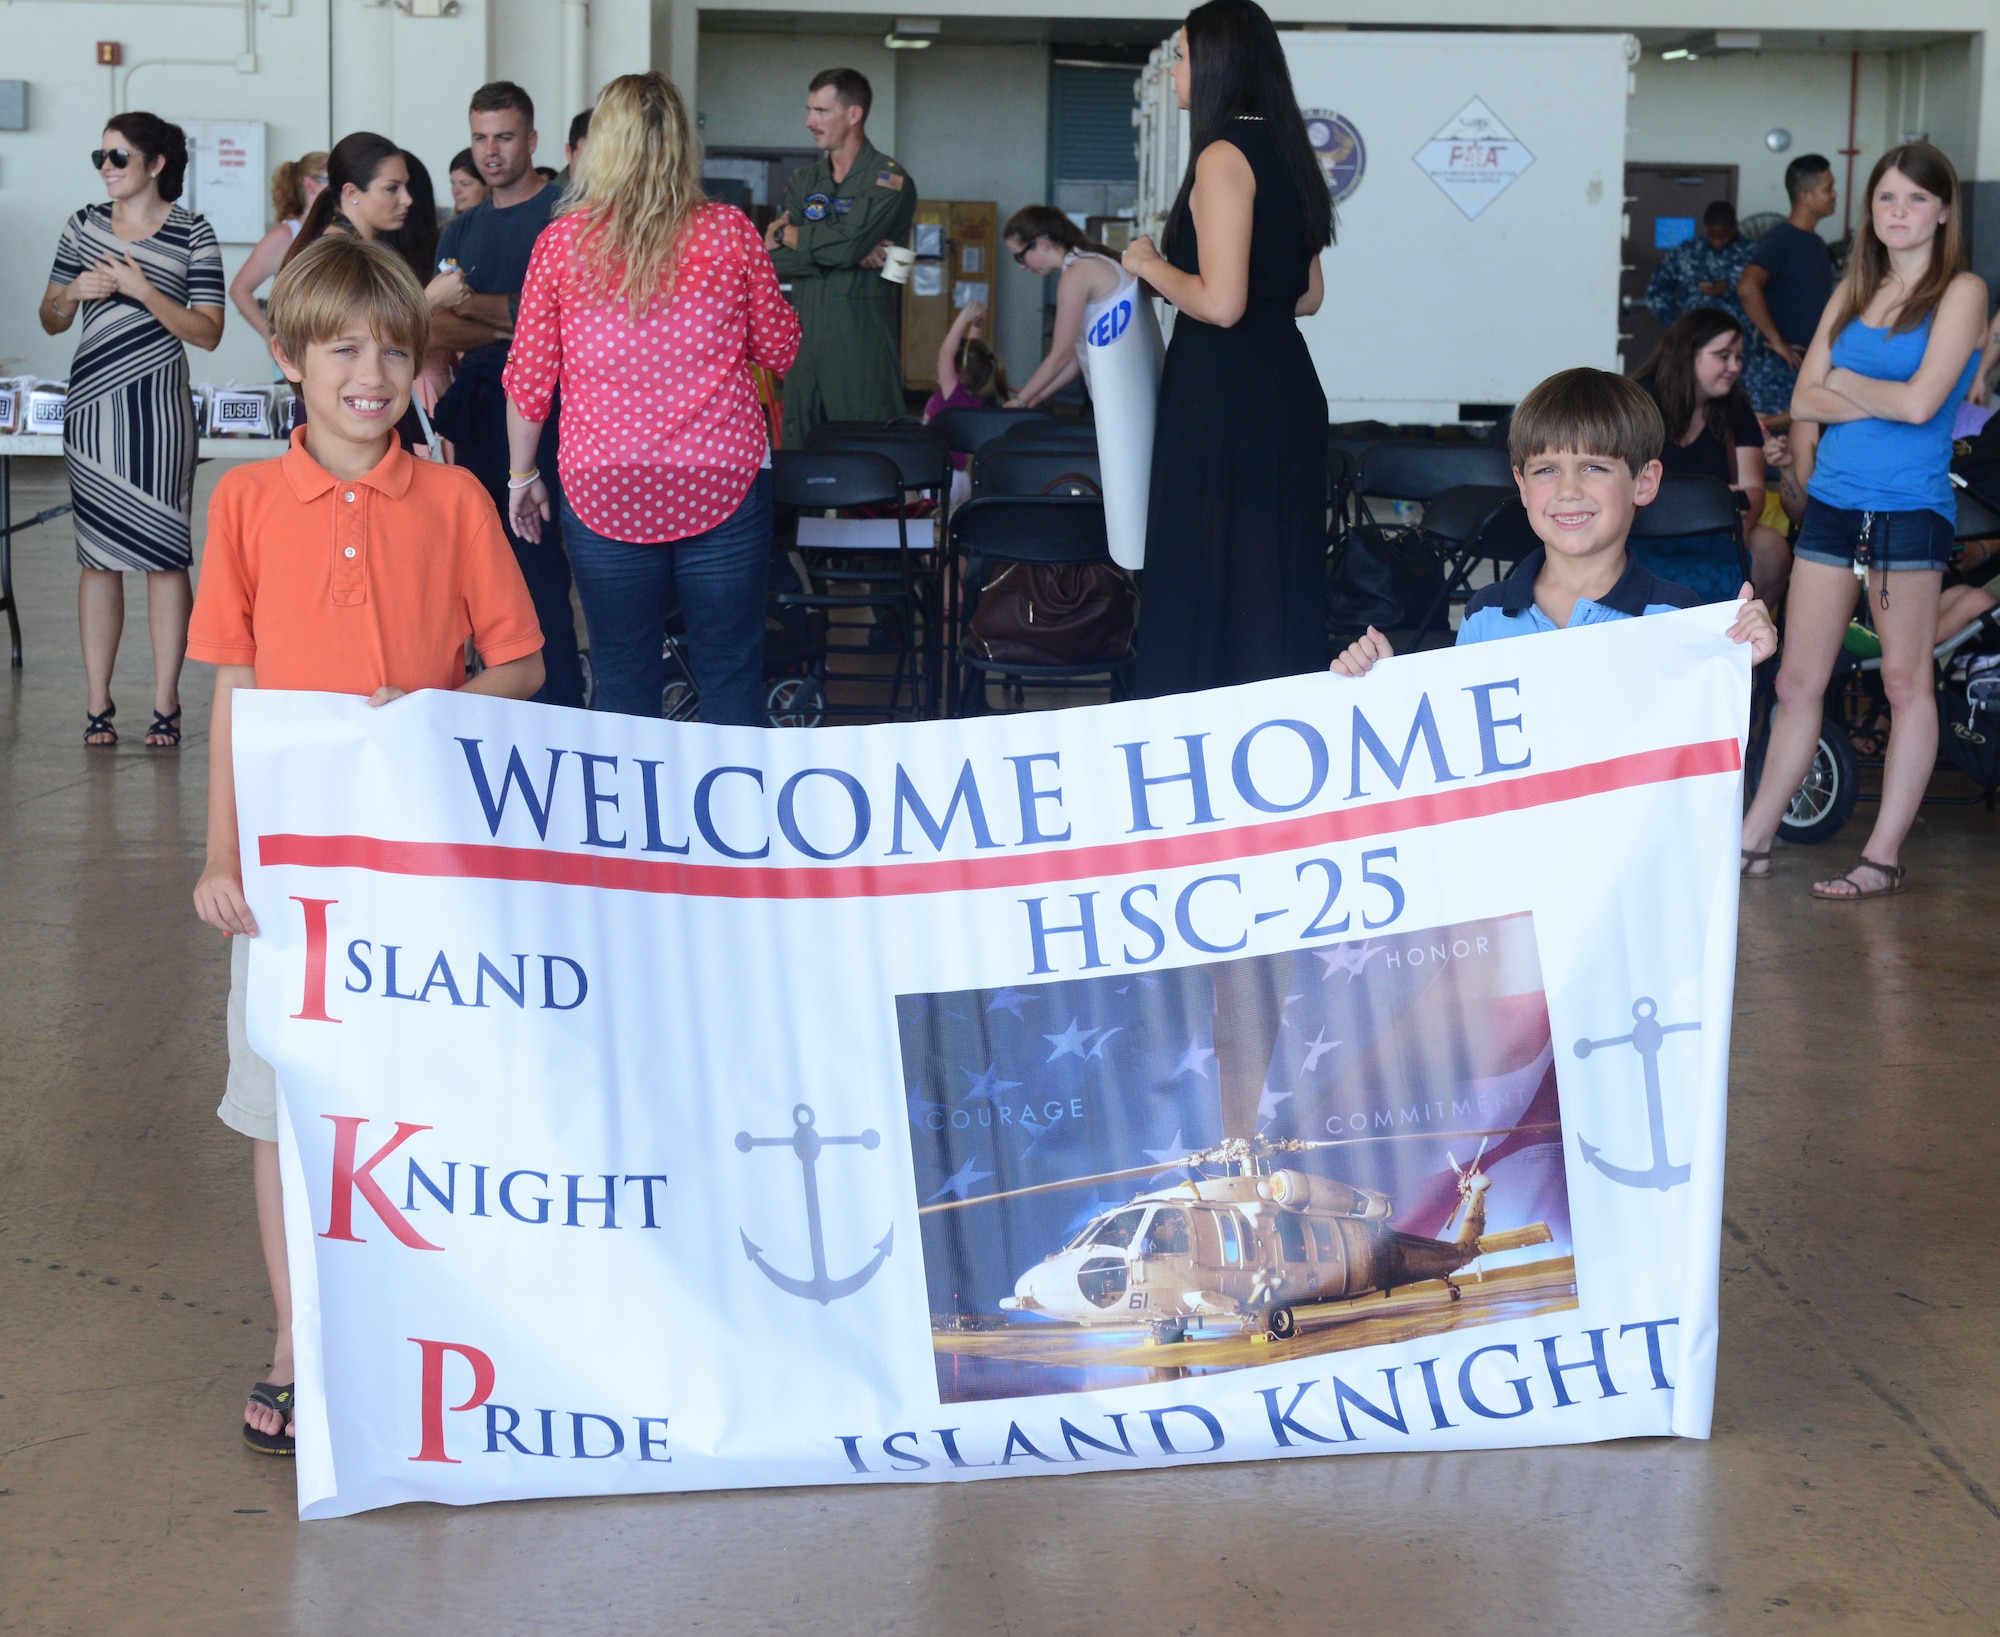 Families, friends and loved ones welcome home U.S. Navy Detachment 6 Sailors after a seven month deployment Dec. 7, 2015, at Andersen Air Force Base, Guam. The Sailors supported a Combat Logistics Force mission from the USNS Washington Chambers in support of Commander Task Force 73. (U.S. Air Force photo by Airman 1st Class Arielle Vasquez/Released)